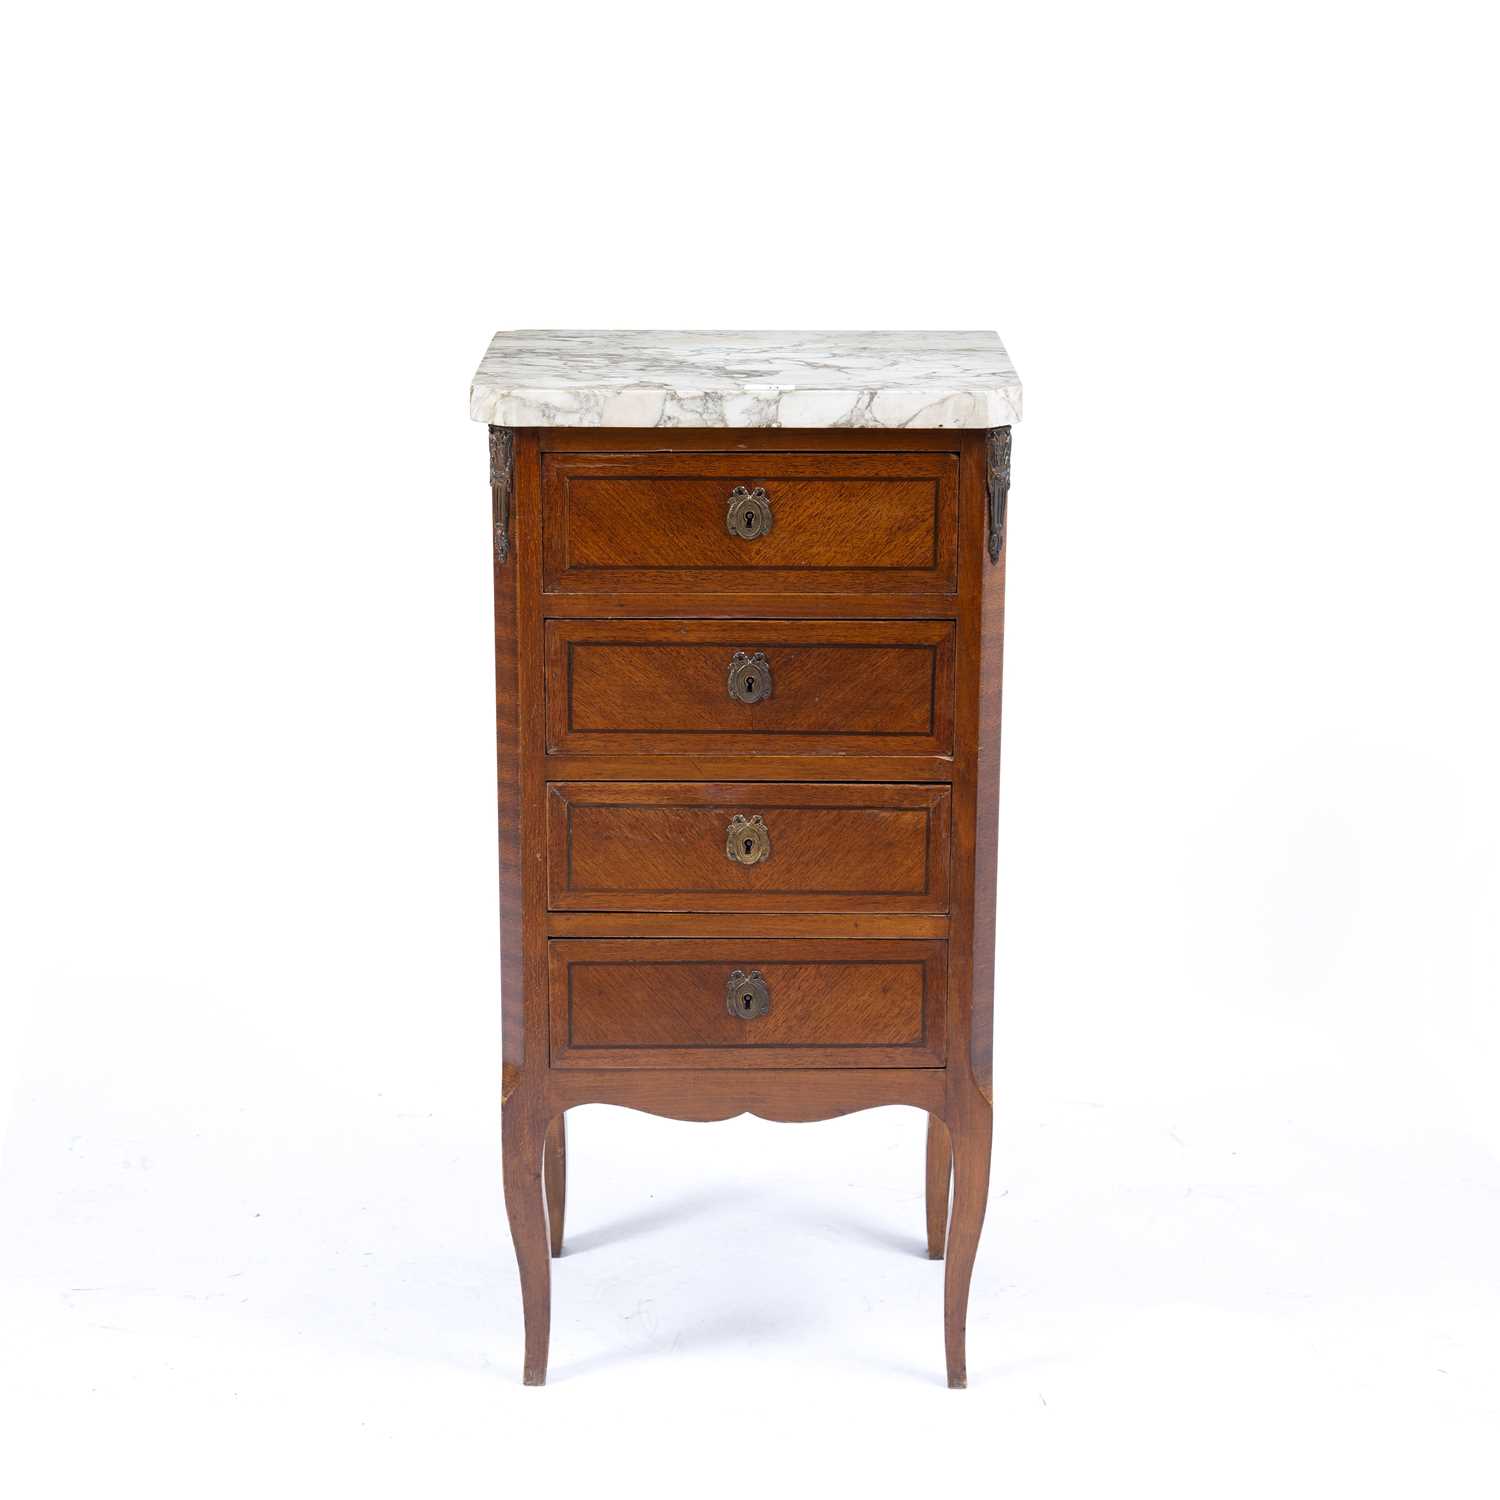 A French mahogany veneered narrow chest, of four drawers, with marble top, on shaped legs, 42cm